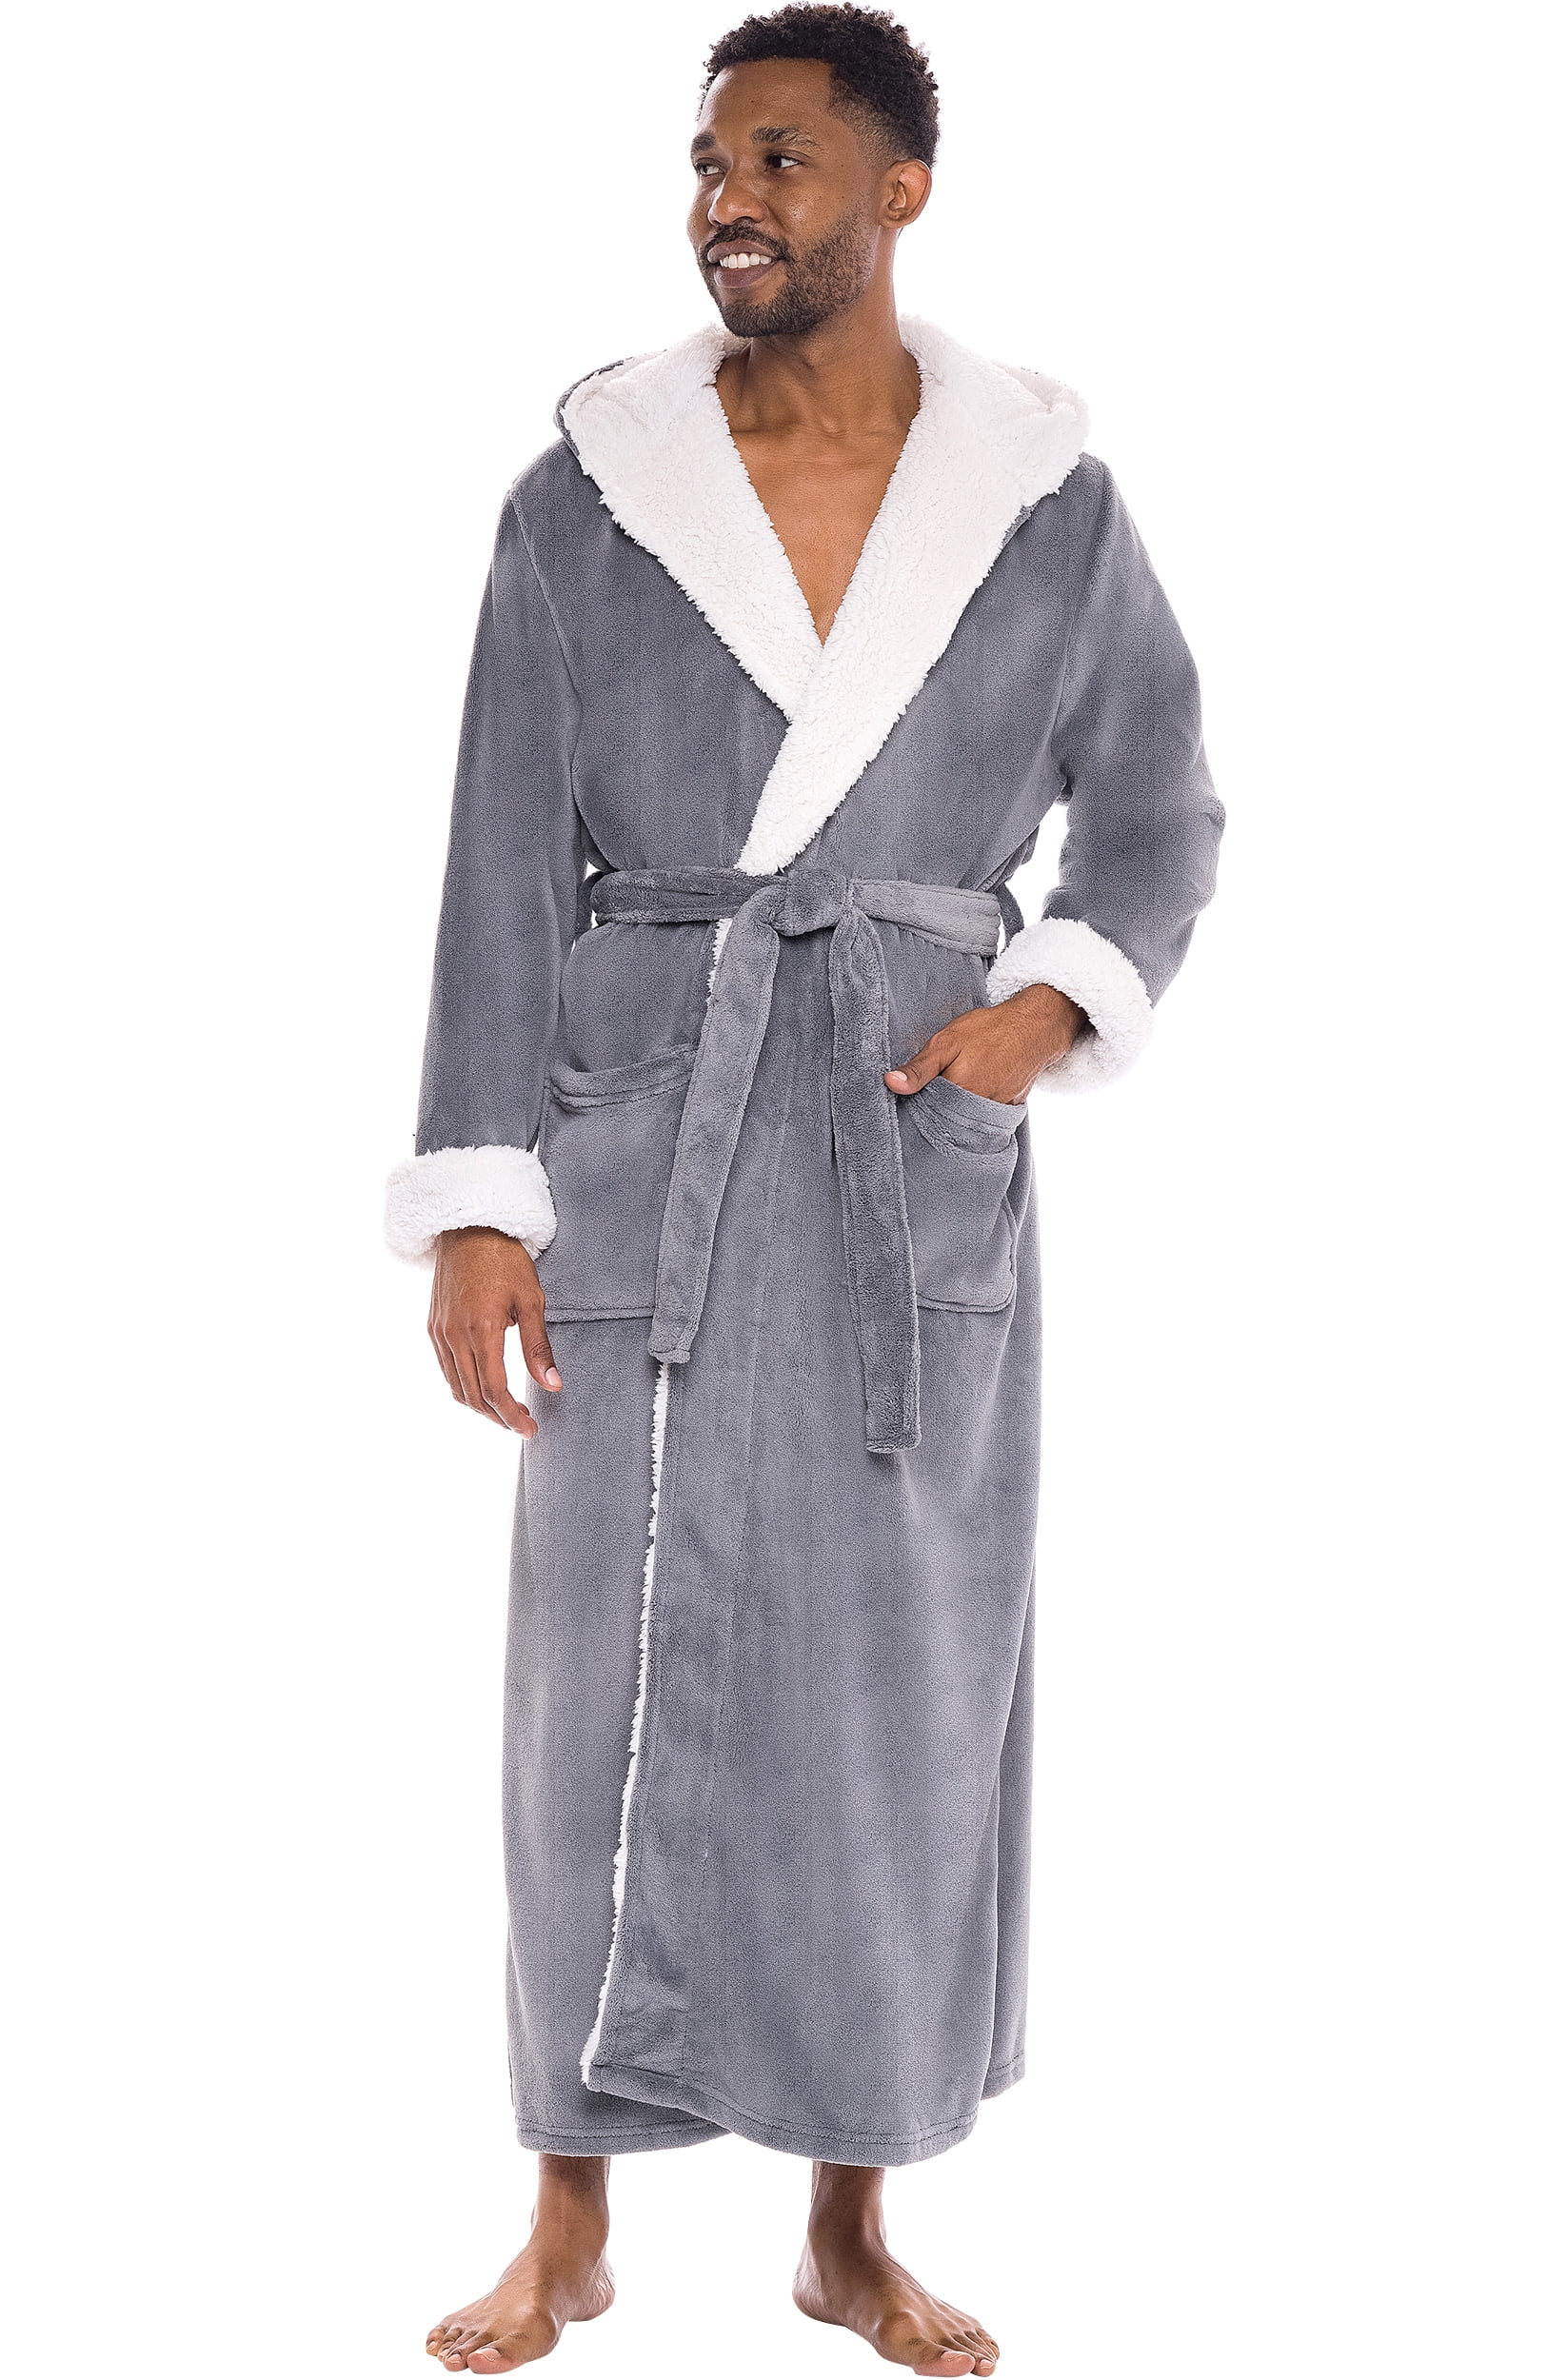 Big and Tall Luxury Ultra Soft Knit Hooded Jersey Robe in Grey Stripe to 5X Tall and 6X Big 